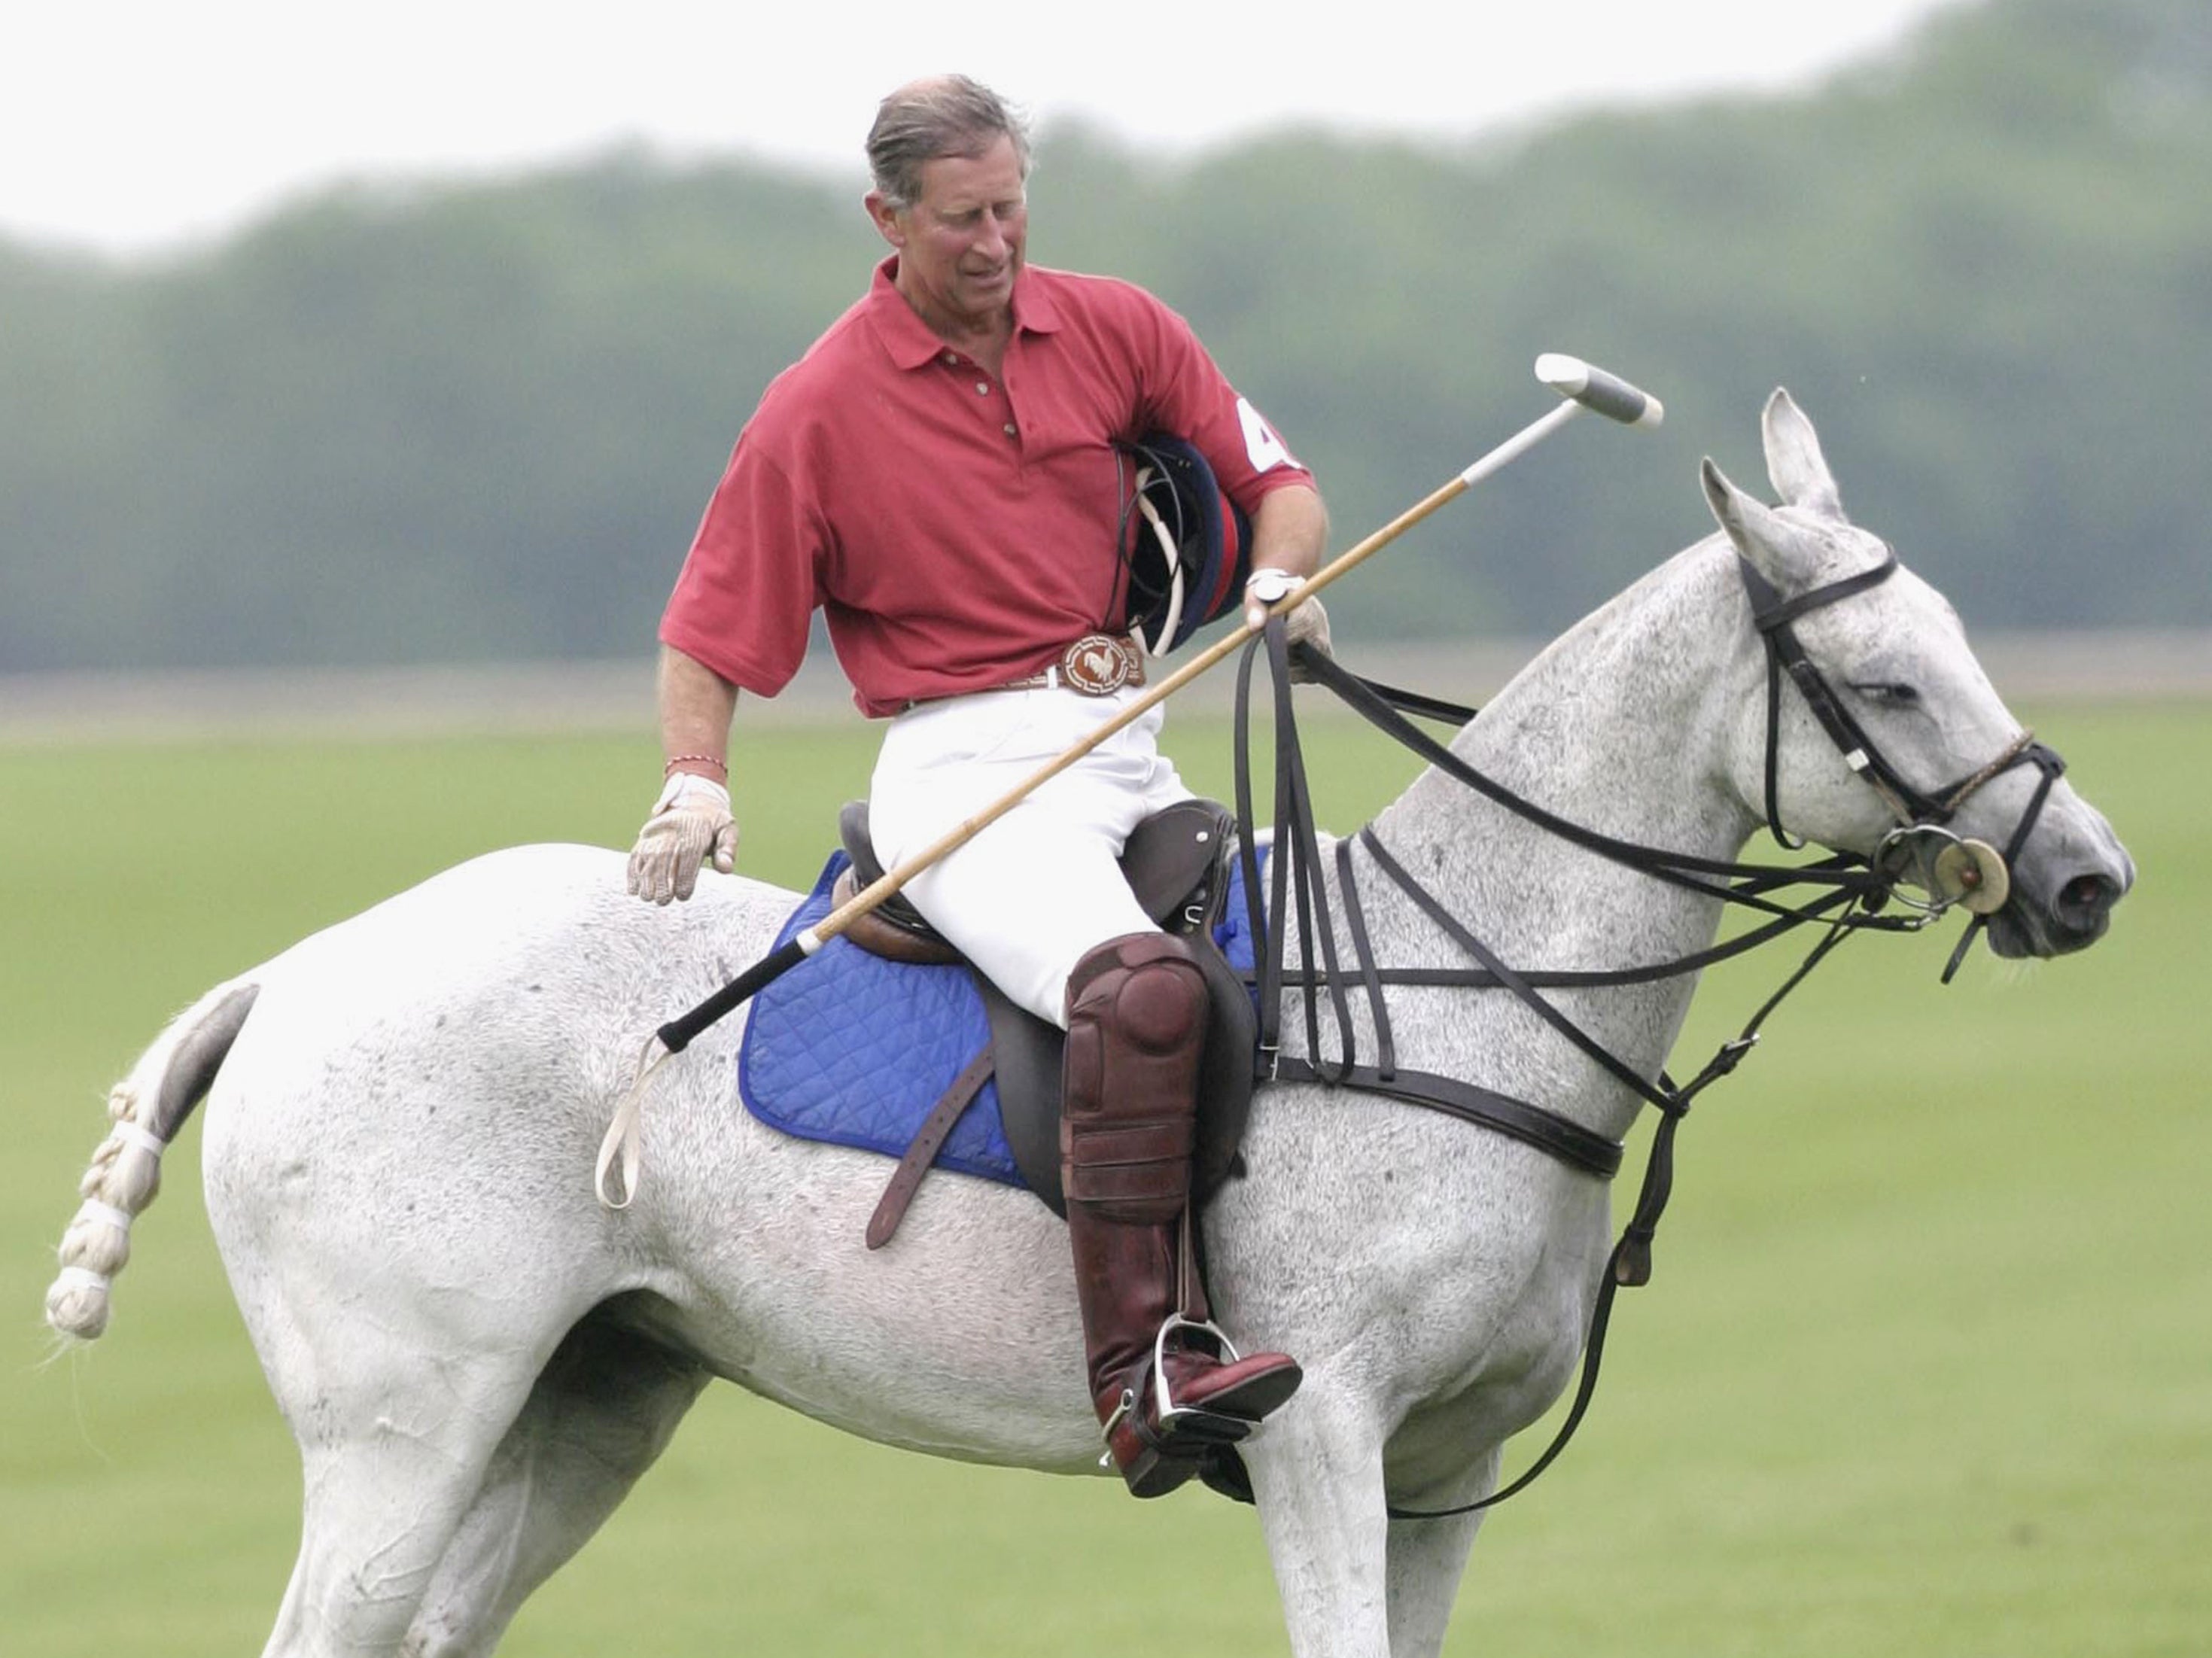 His royal highess Prince Charles, The Prince of Wales pats his horse at the end of the Chakravarty polo cup match on 7 June 2003 in Tetbury, England at Beufort polo grounds.